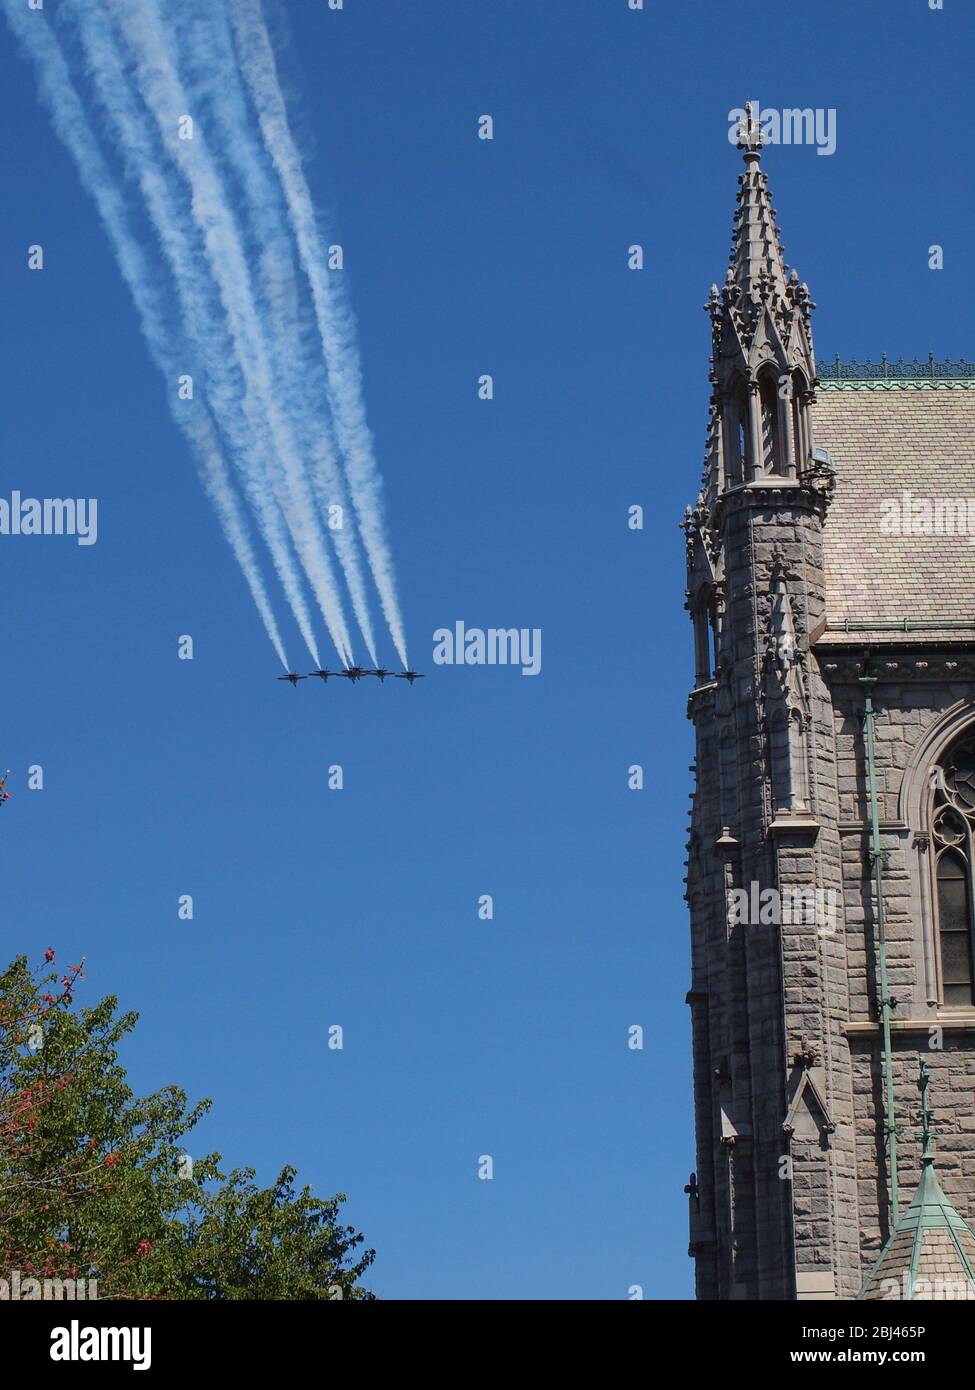 US Navy Blue Angels and US Air Force Thunderbirds over Newark, New Jersey USA on April 28th, 2020 in a tribute to the first responders and essential workers who have been on the front lines of the Covid-19 pandemic. Under a crystal clear blue sky the planes are seen over Newark, New Jersey's Sacred Heart Cathedral as they head north. Twelve aircraft in total passed seconds apart over the city. Photo credit: Tom Cassidy/ Alamy Stock Photo